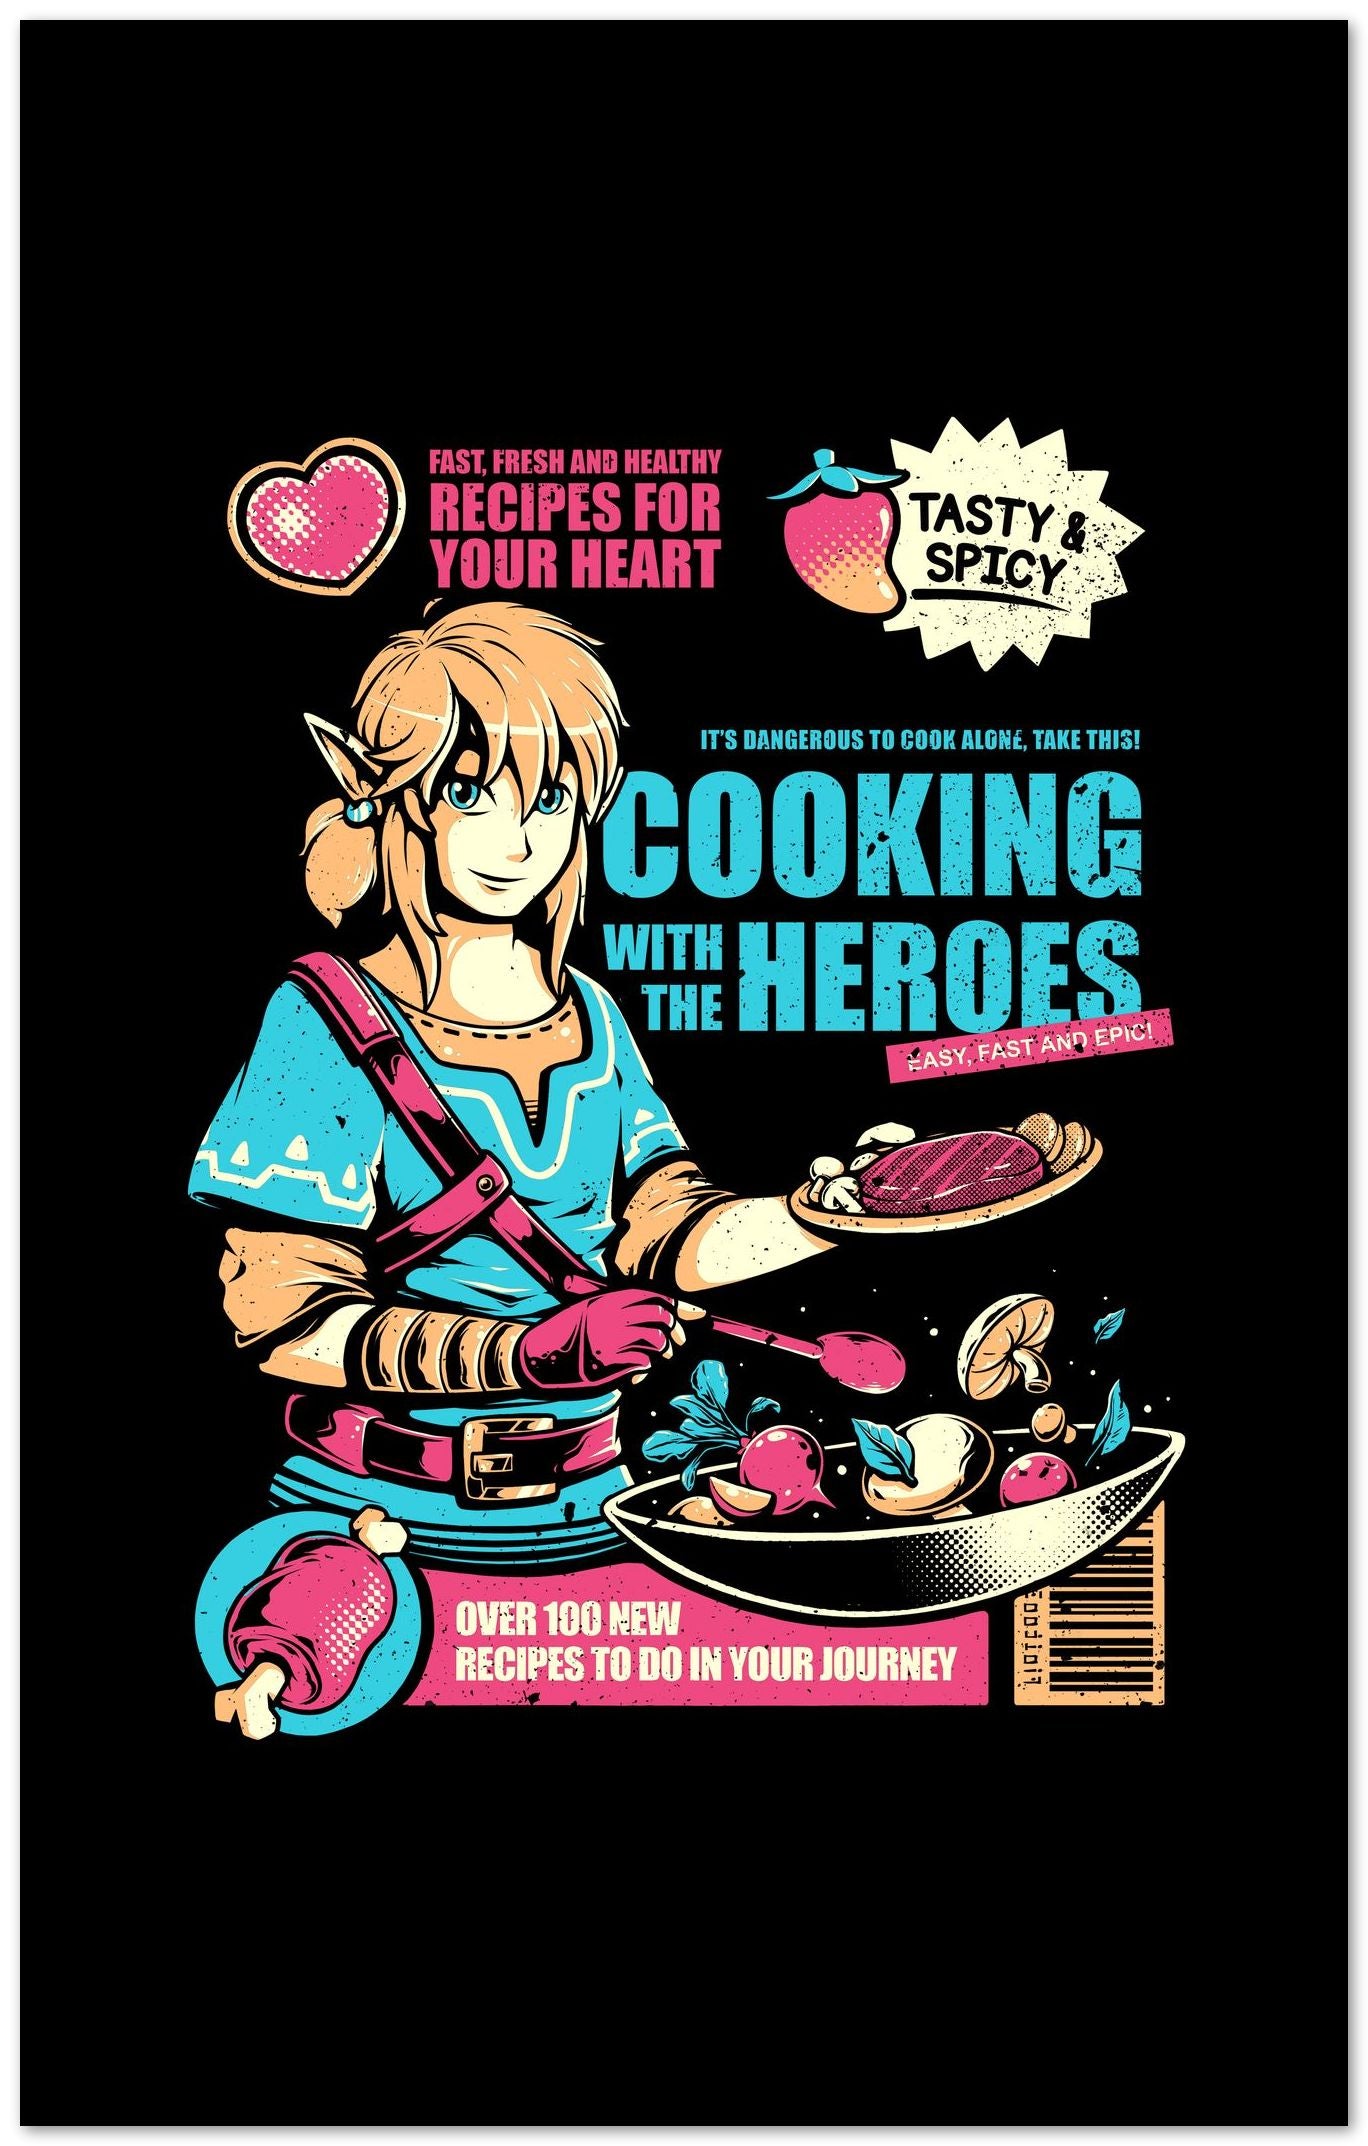 Cooking with the Heroes - @Ilustrata